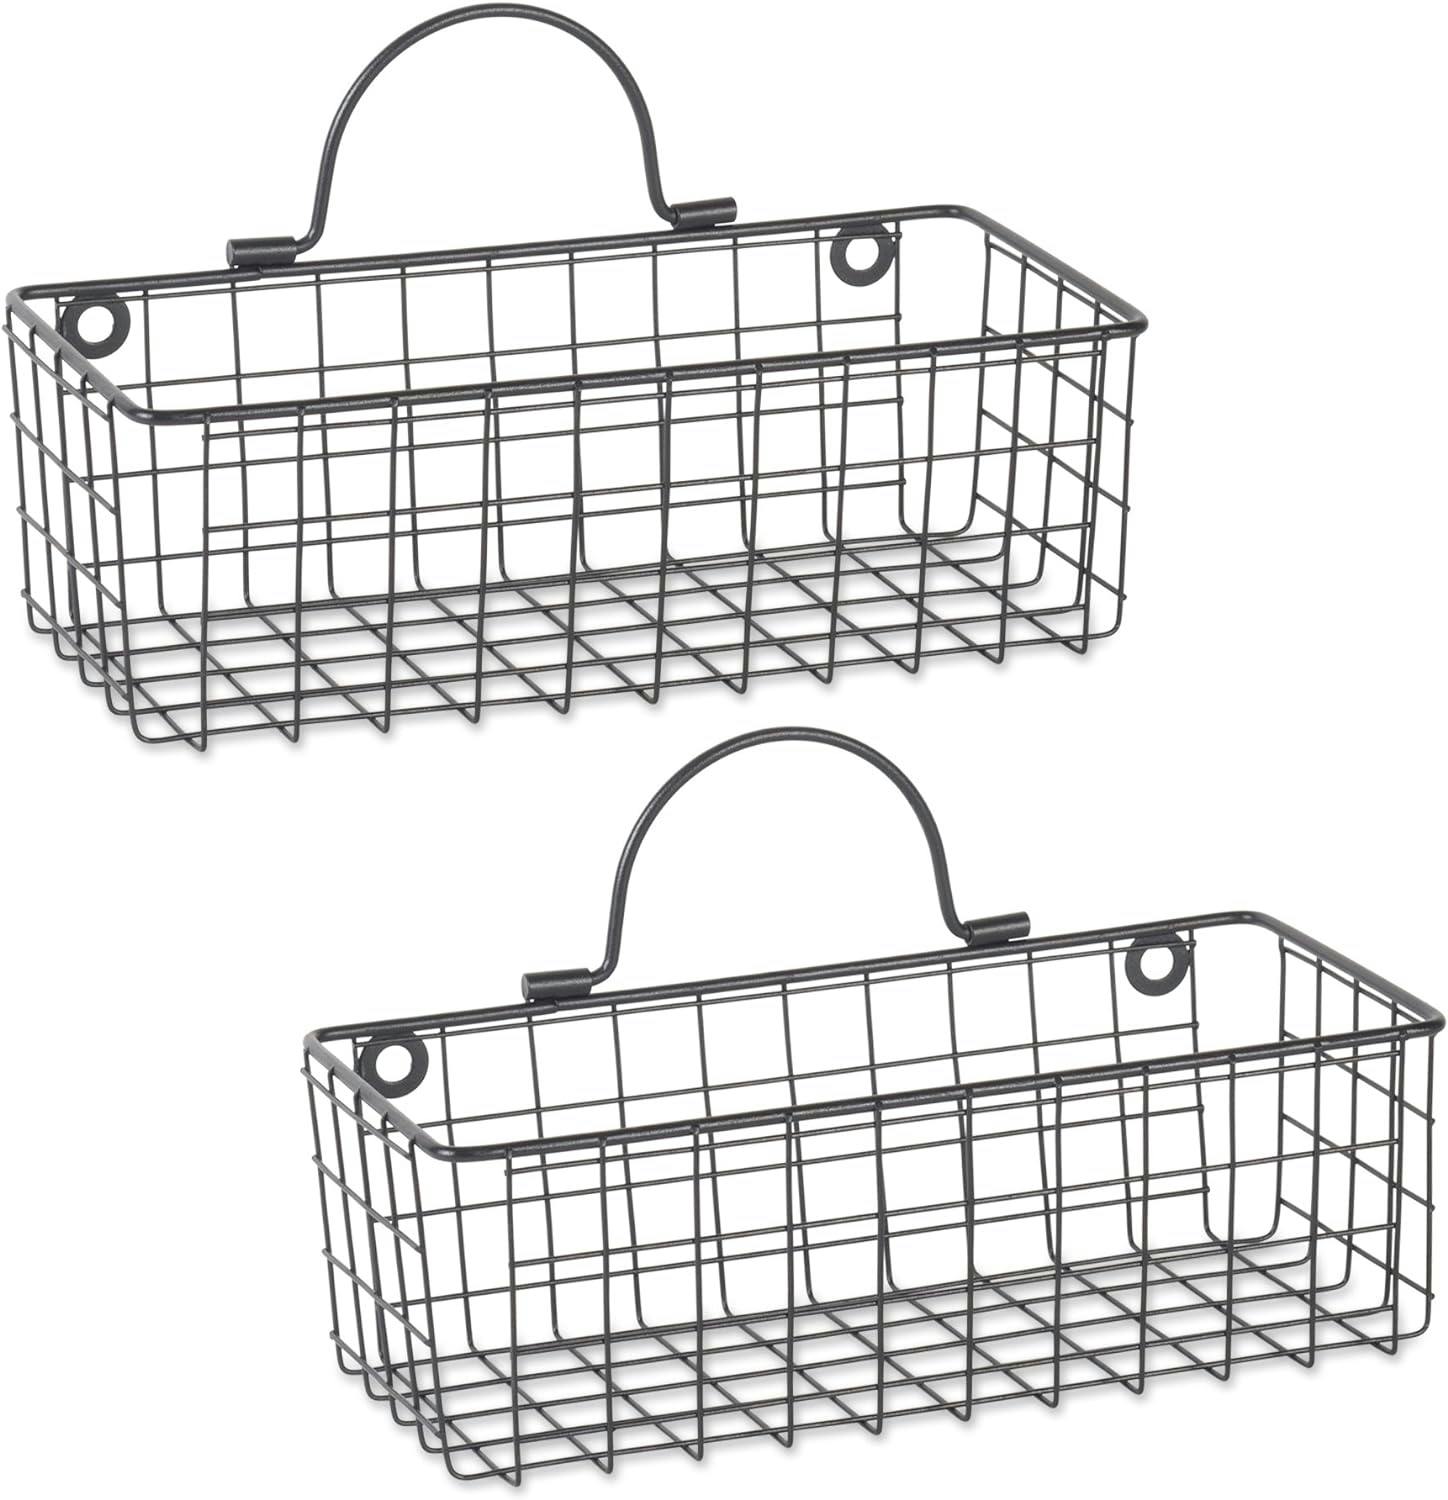 Vintage Black Small Rectangular Wire Wall Baskets, Set of 2